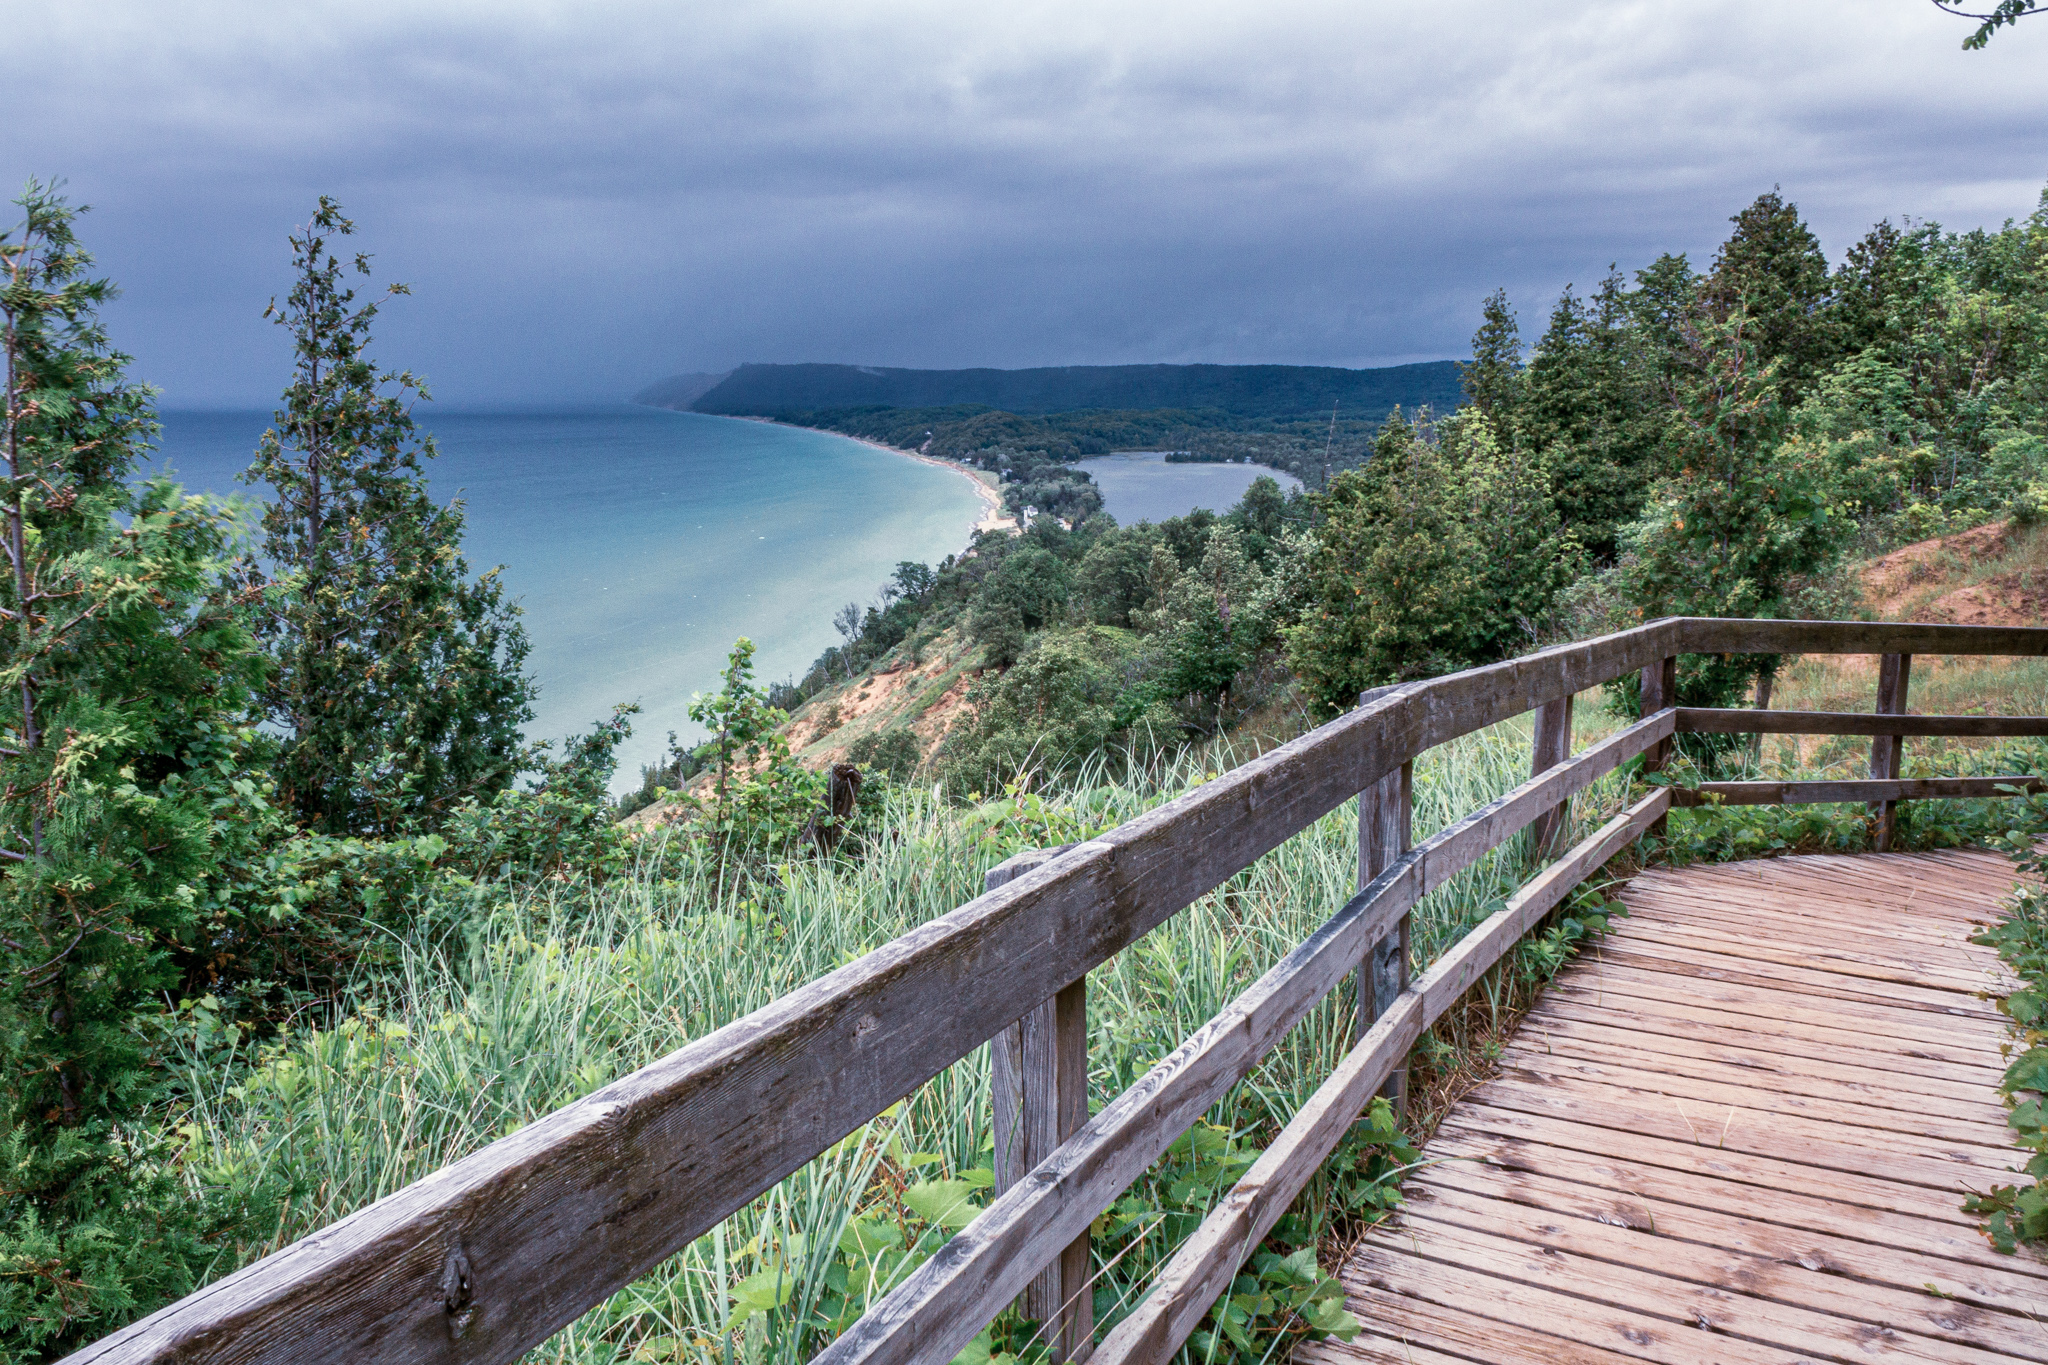 Sweeping views from Empire Bluffs overlooking Lake Michigan in the Sleeping Bear Dunes National Lakeshore